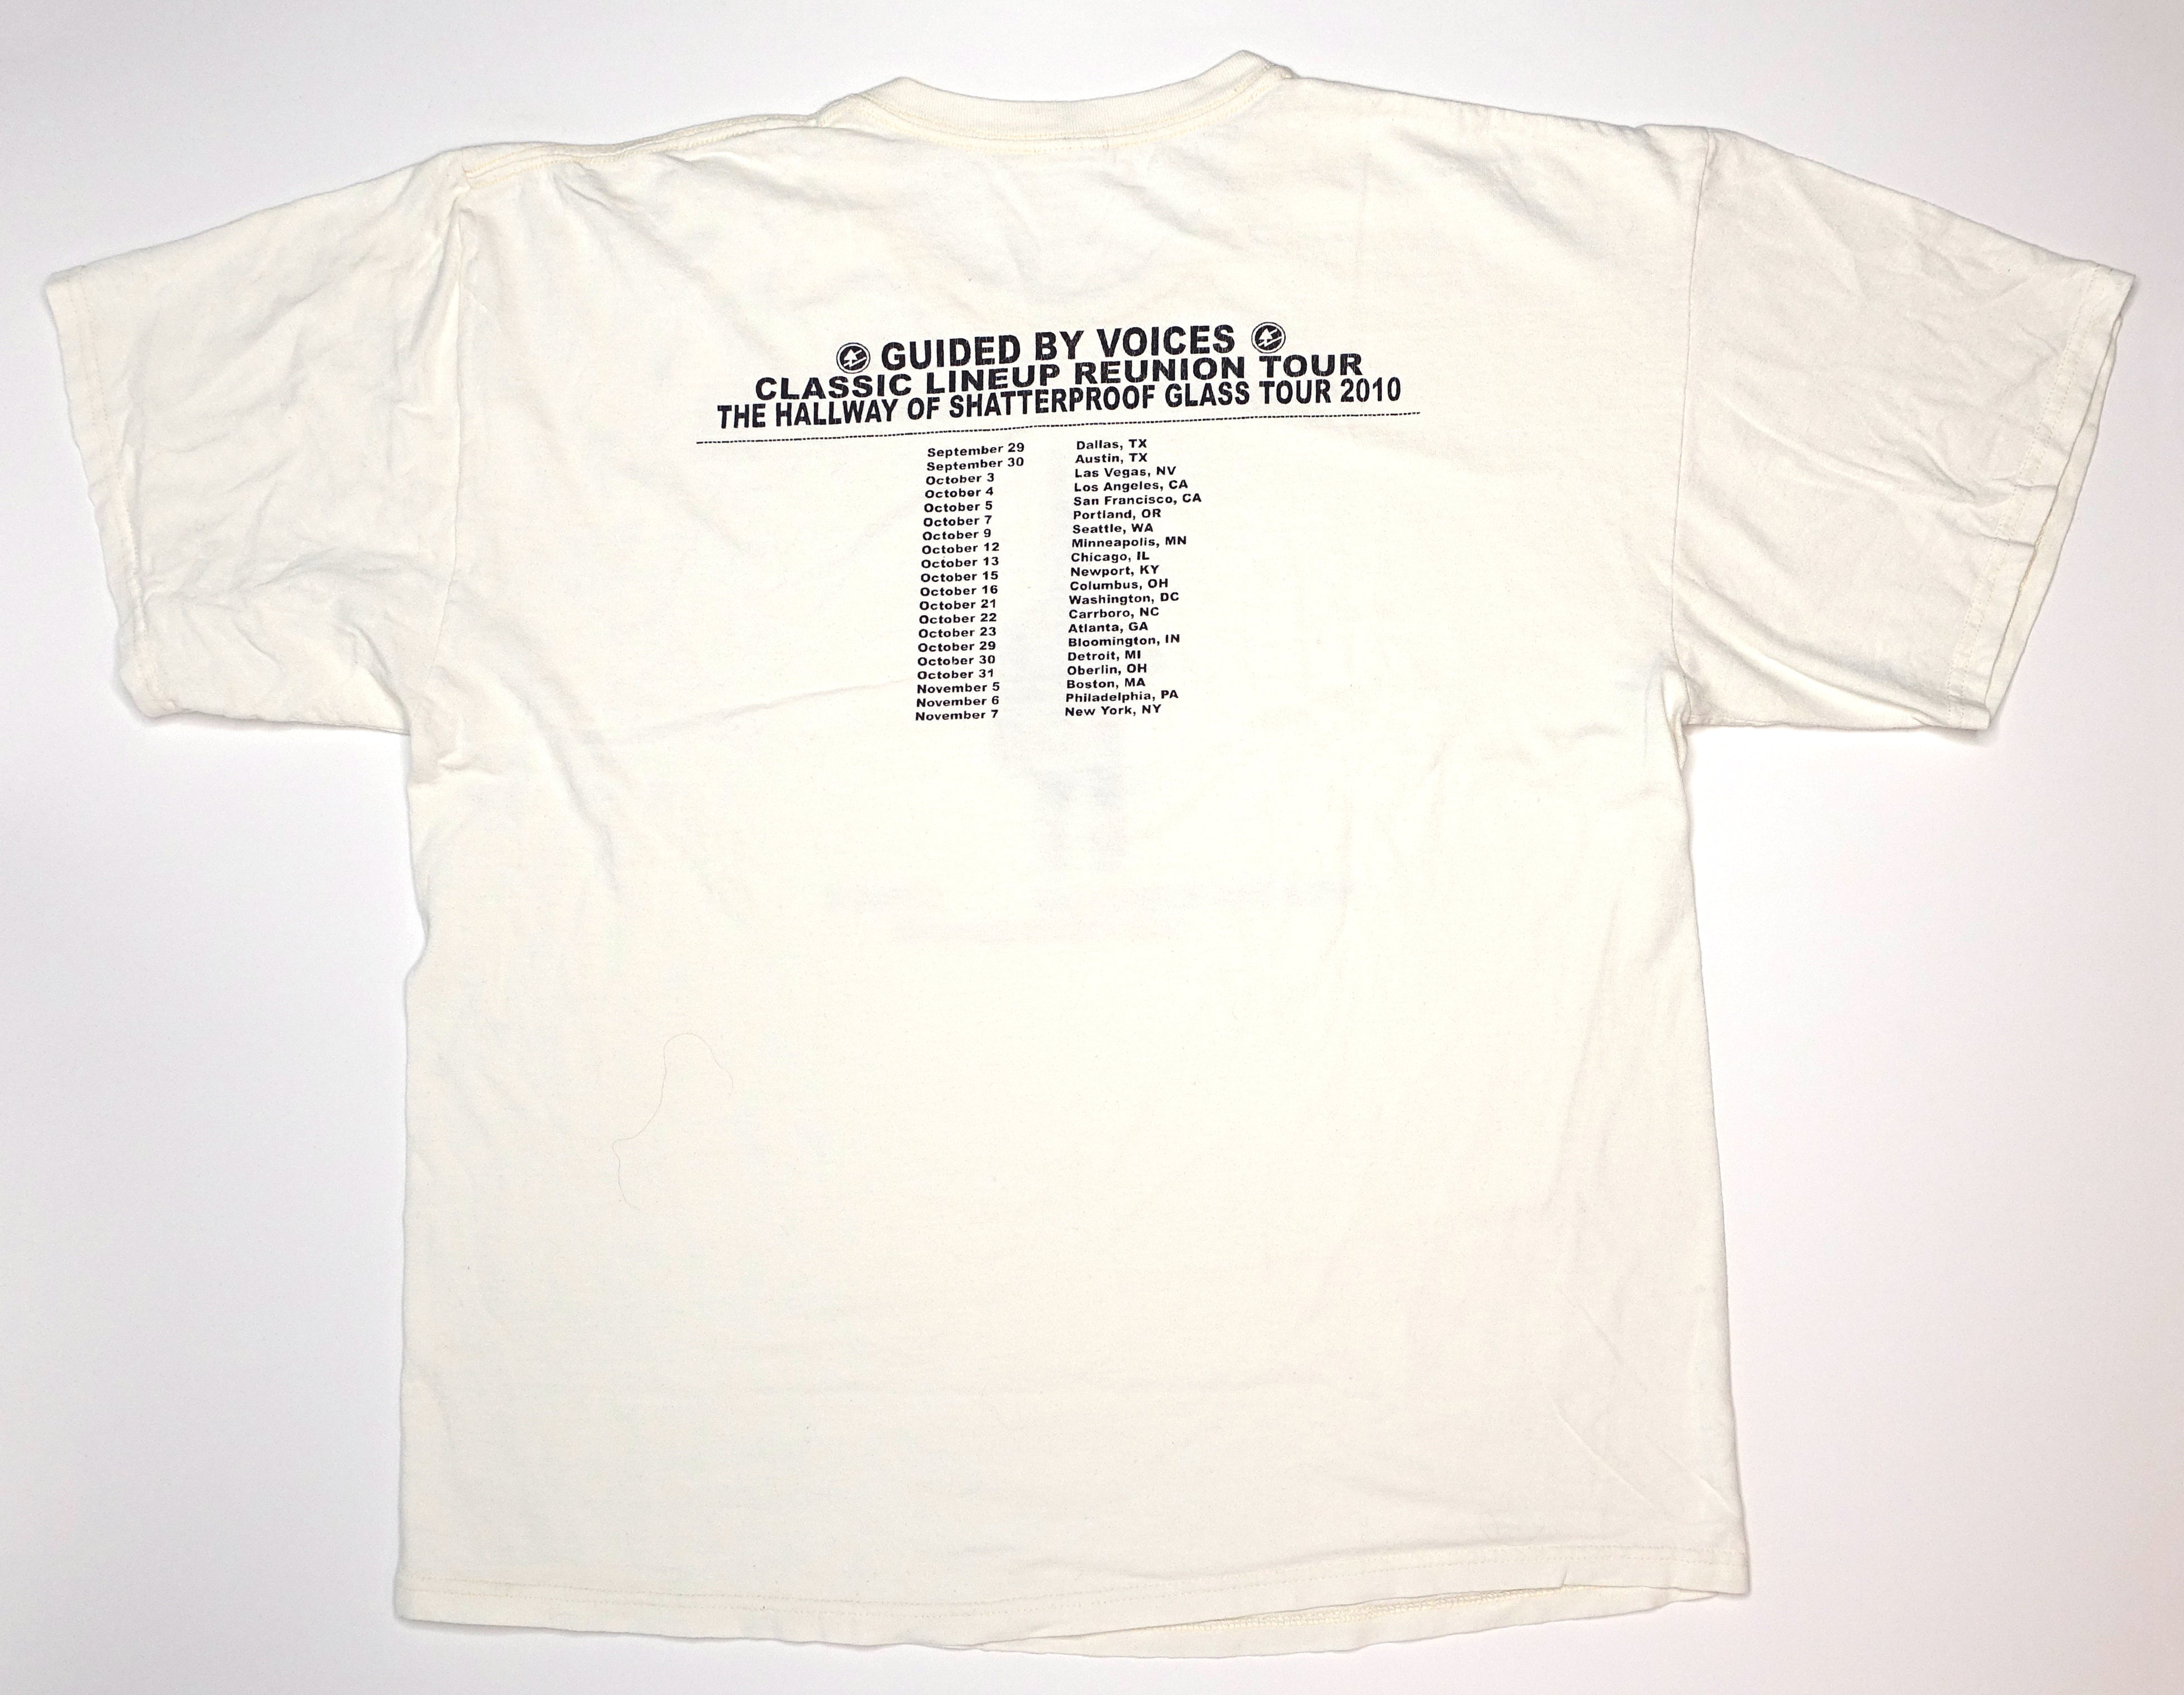 Guided By Voices ‎– Hallway Of Shatterproof Glass 2010 Tour Shirt Size XL